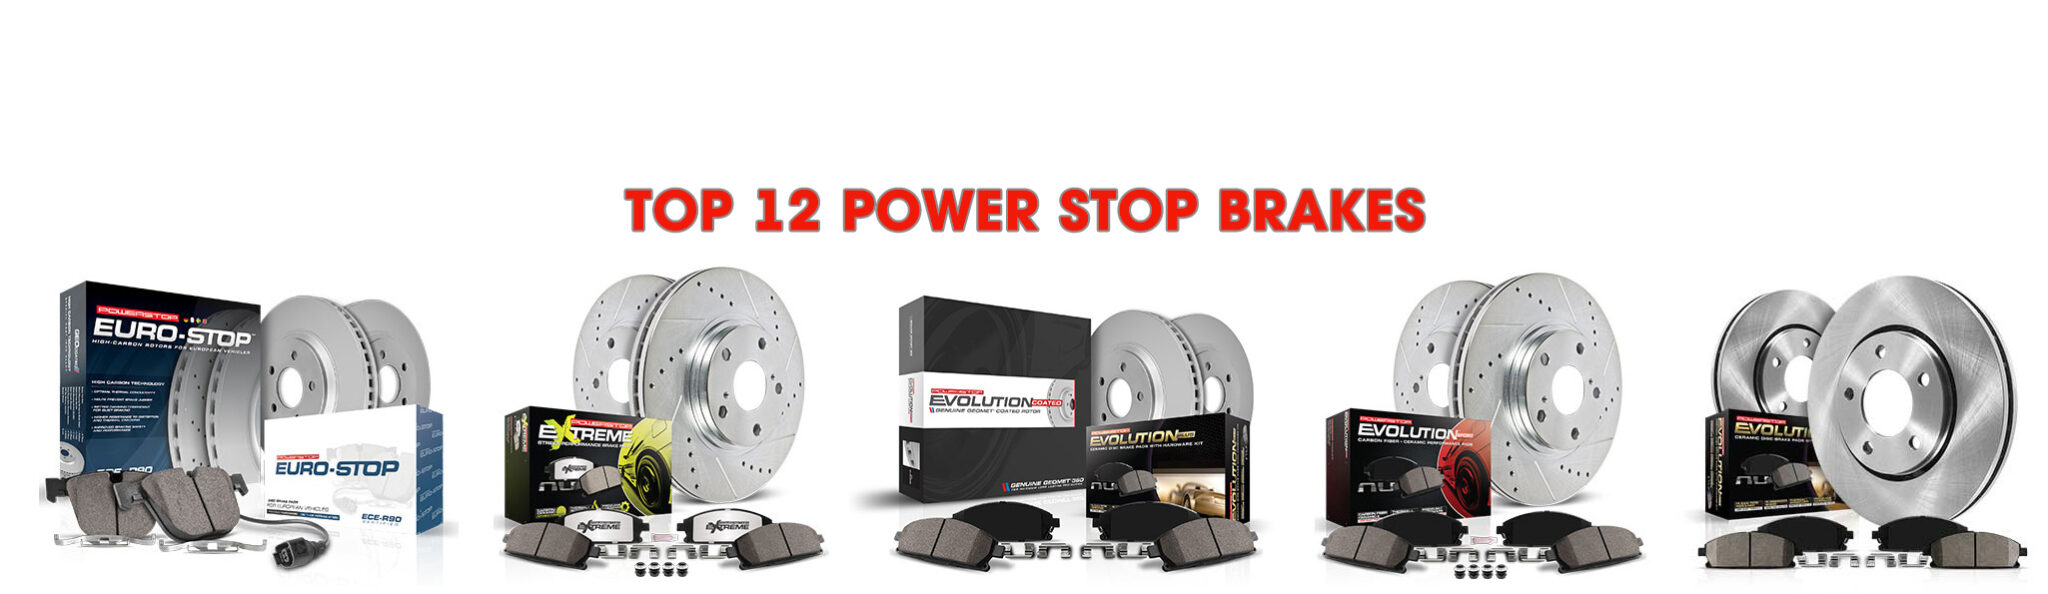 Power Stop Brakes Cover